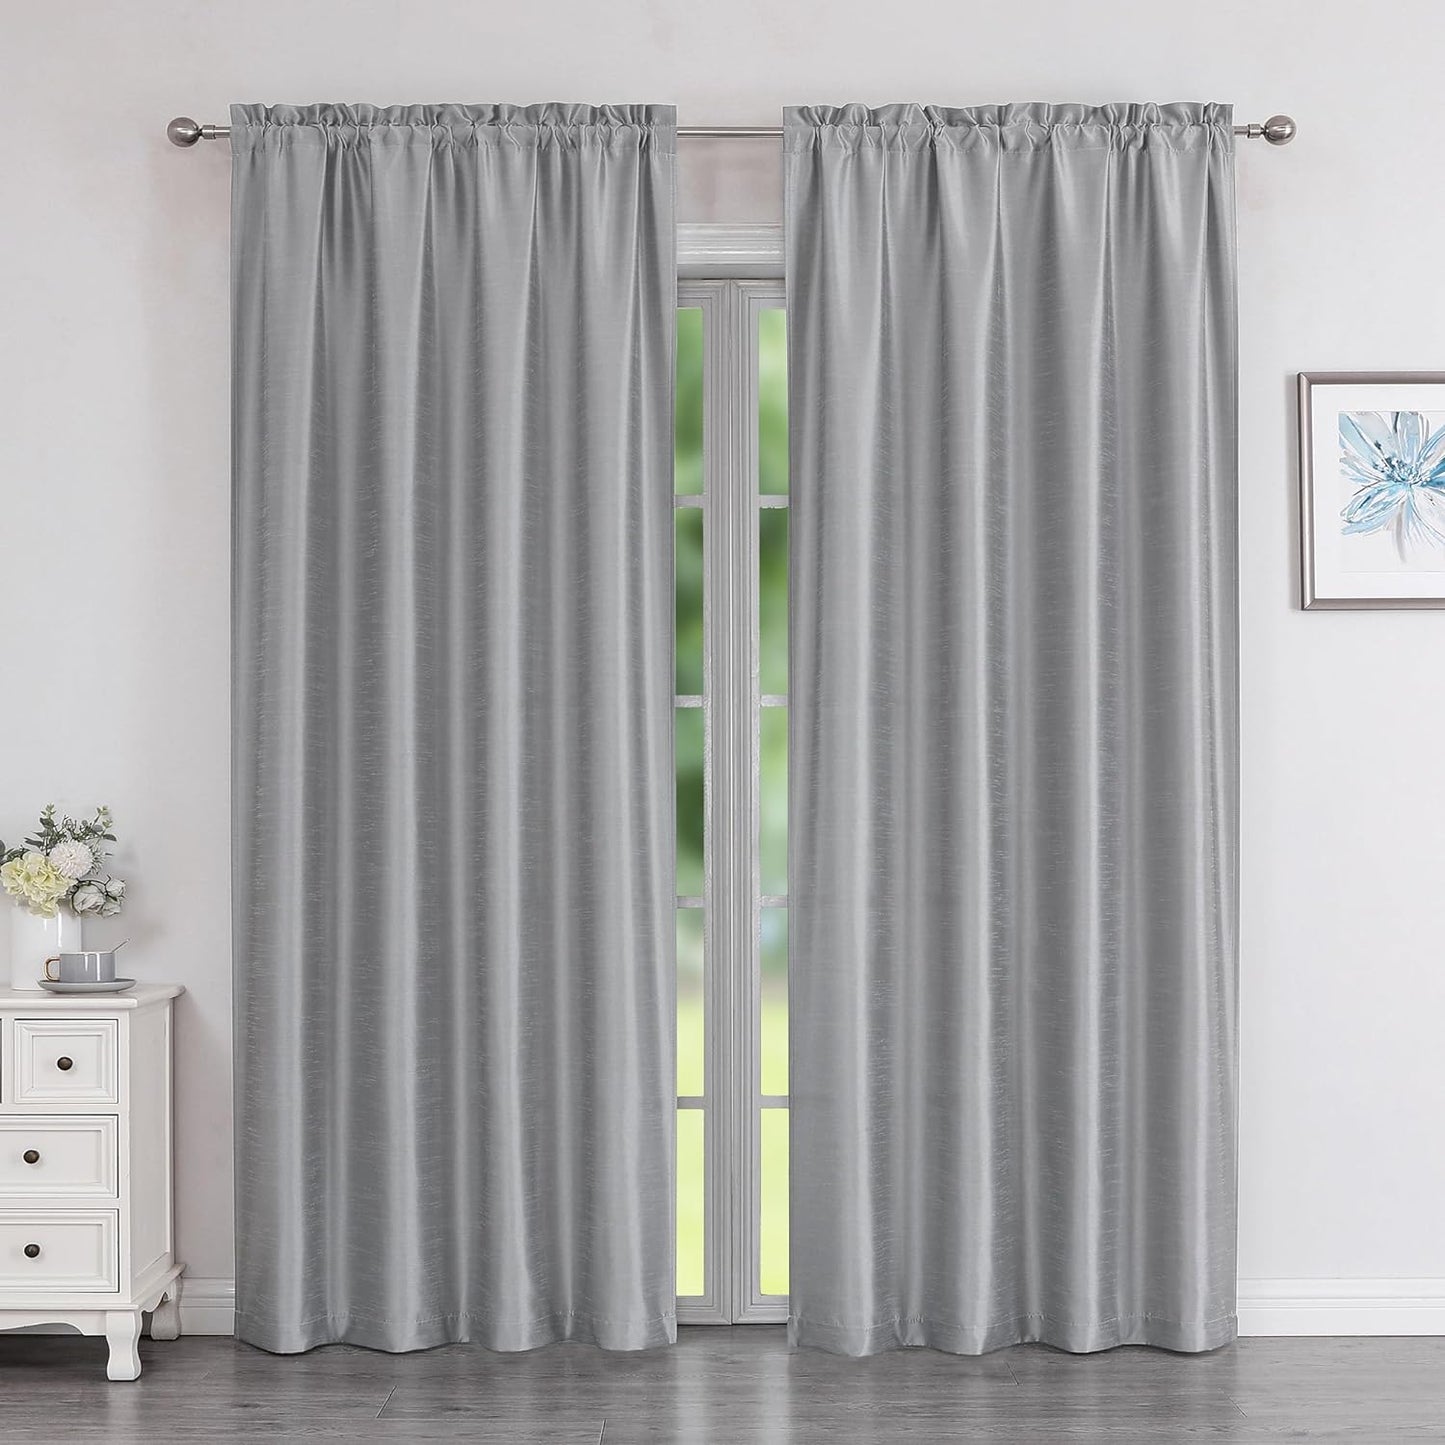 Chyhomenyc Uptown Sage Green Kitchen Curtains 45 Inch Length 2 Panels, Room Darkening Faux Silk Chic Fabric Short Window Curtains for Bedroom Living Room, Each 30Wx45L  Chyhomenyc Silver Gray 2X40"Wx84"L 